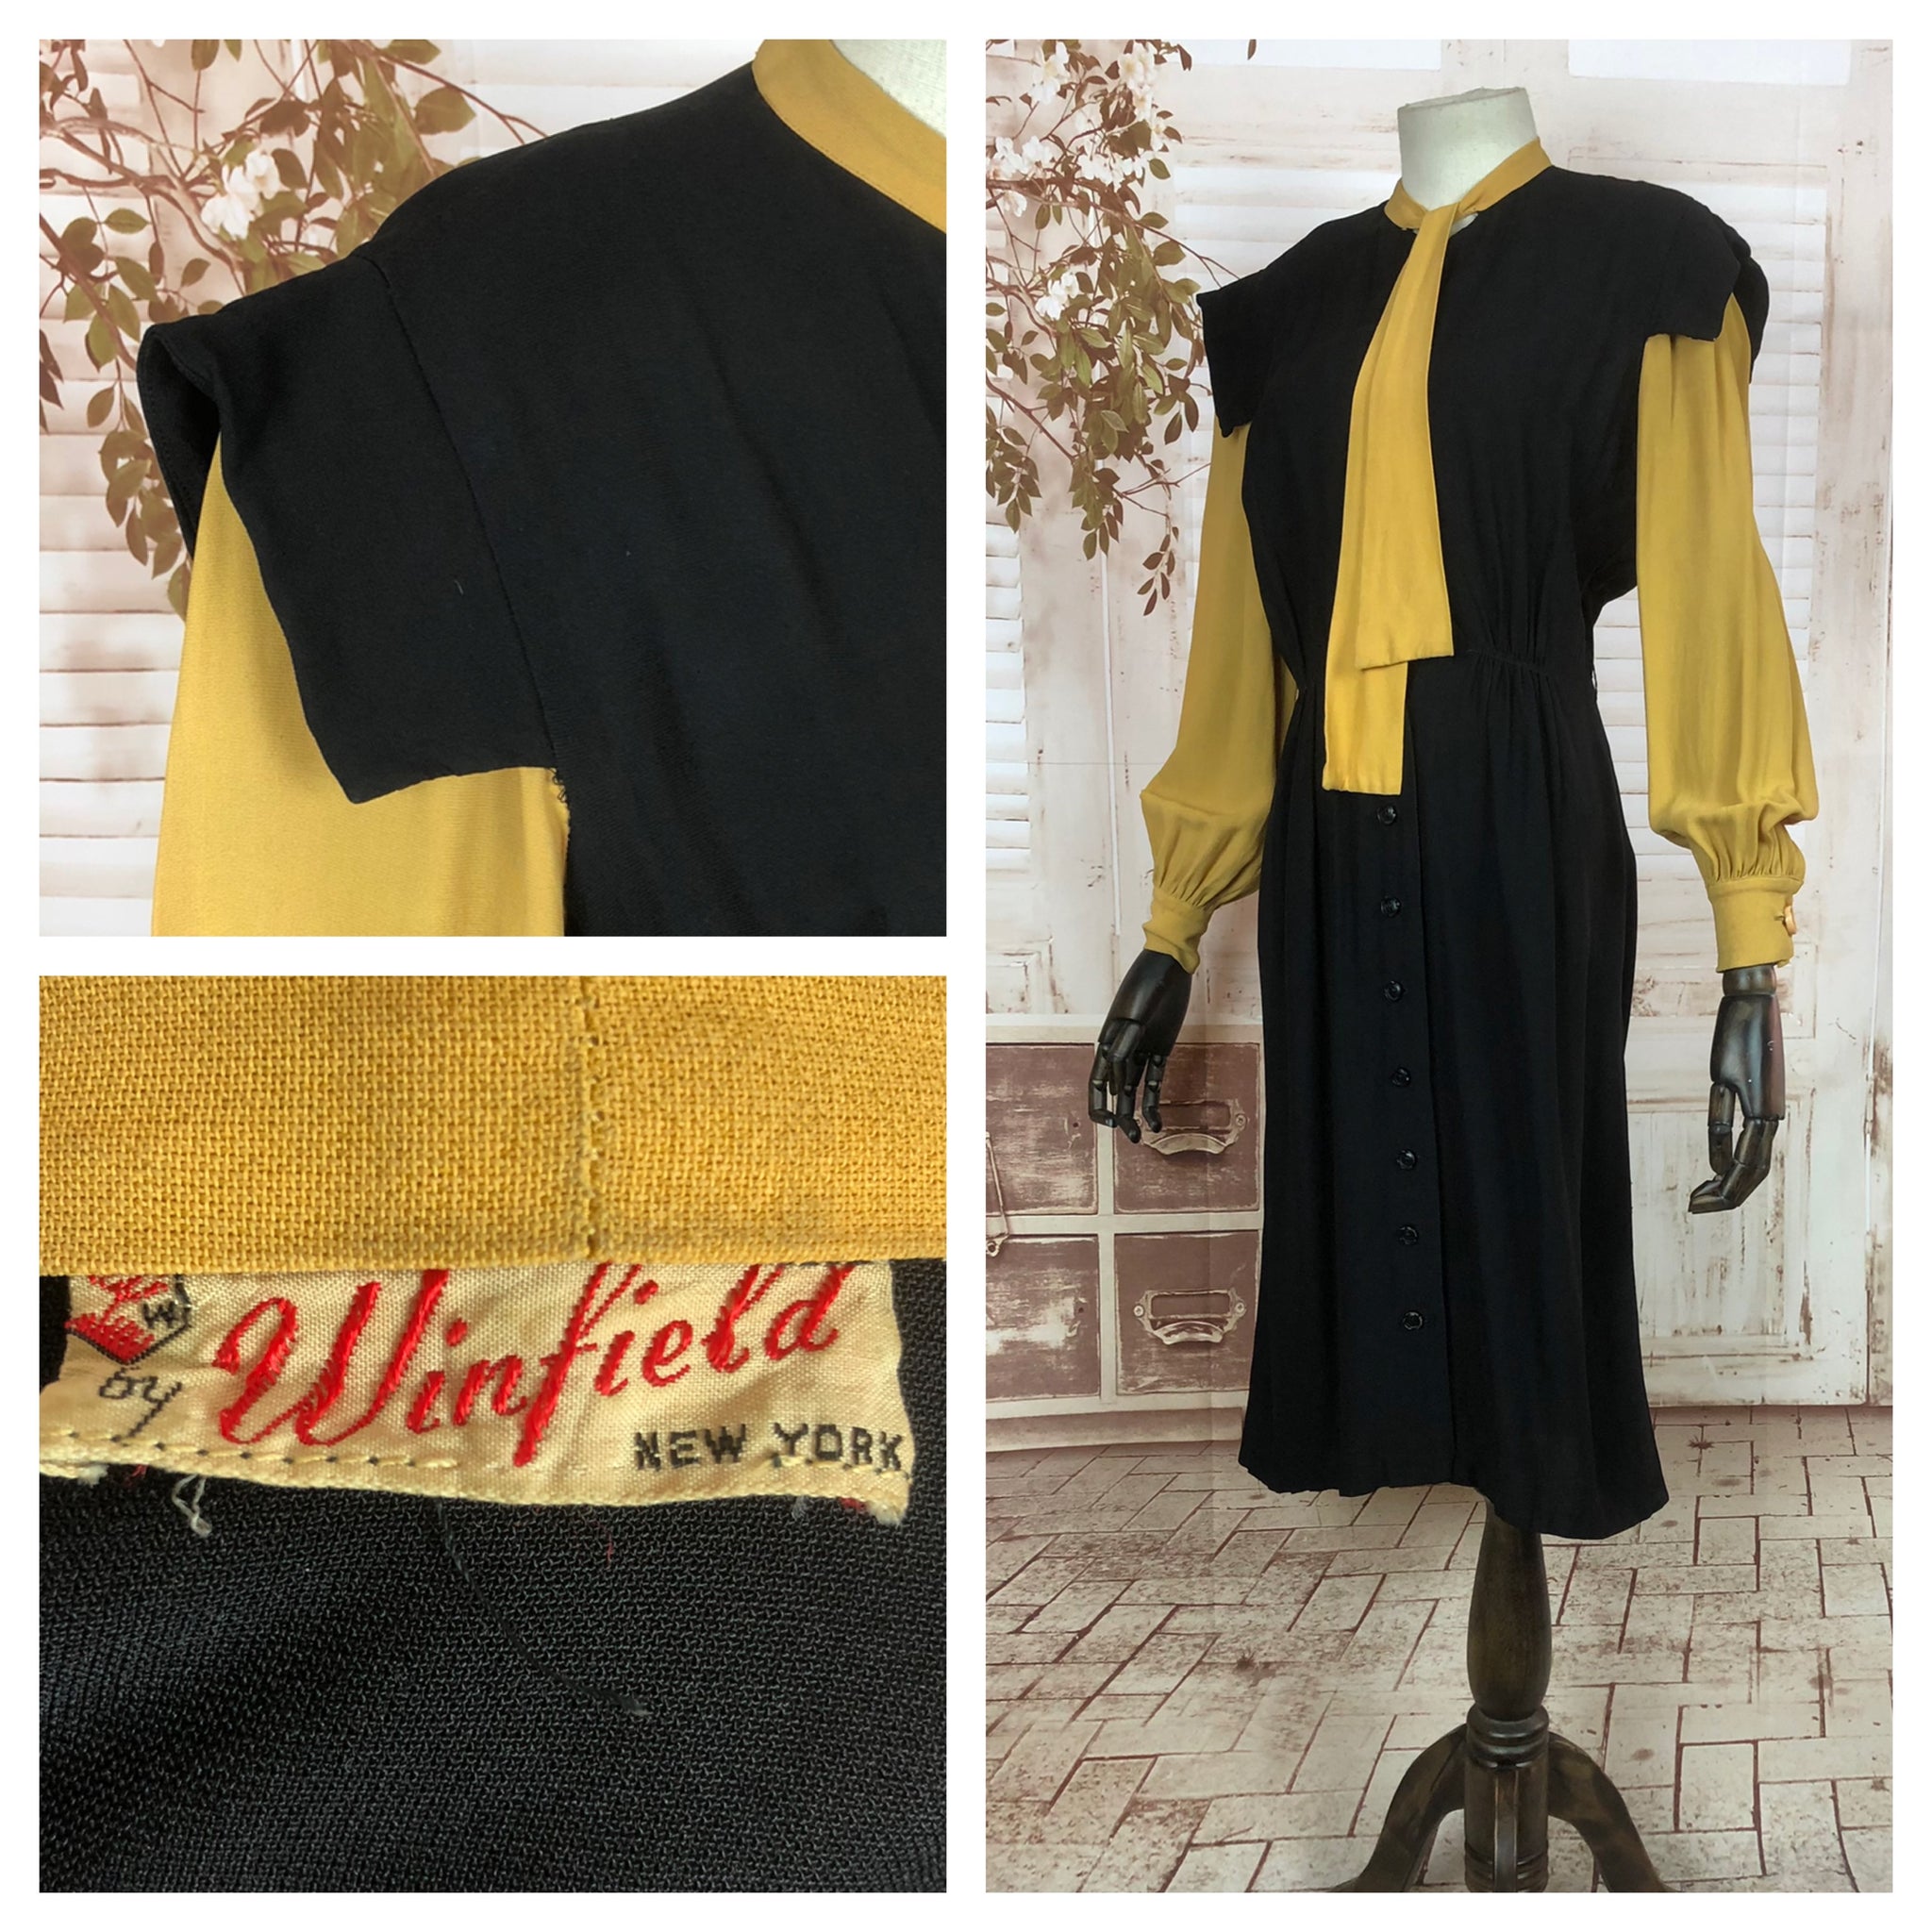 Incredible Original Vintage 1940s 40s Black And Mustard Yellow Colour Block Dress With Bishop Sleeves